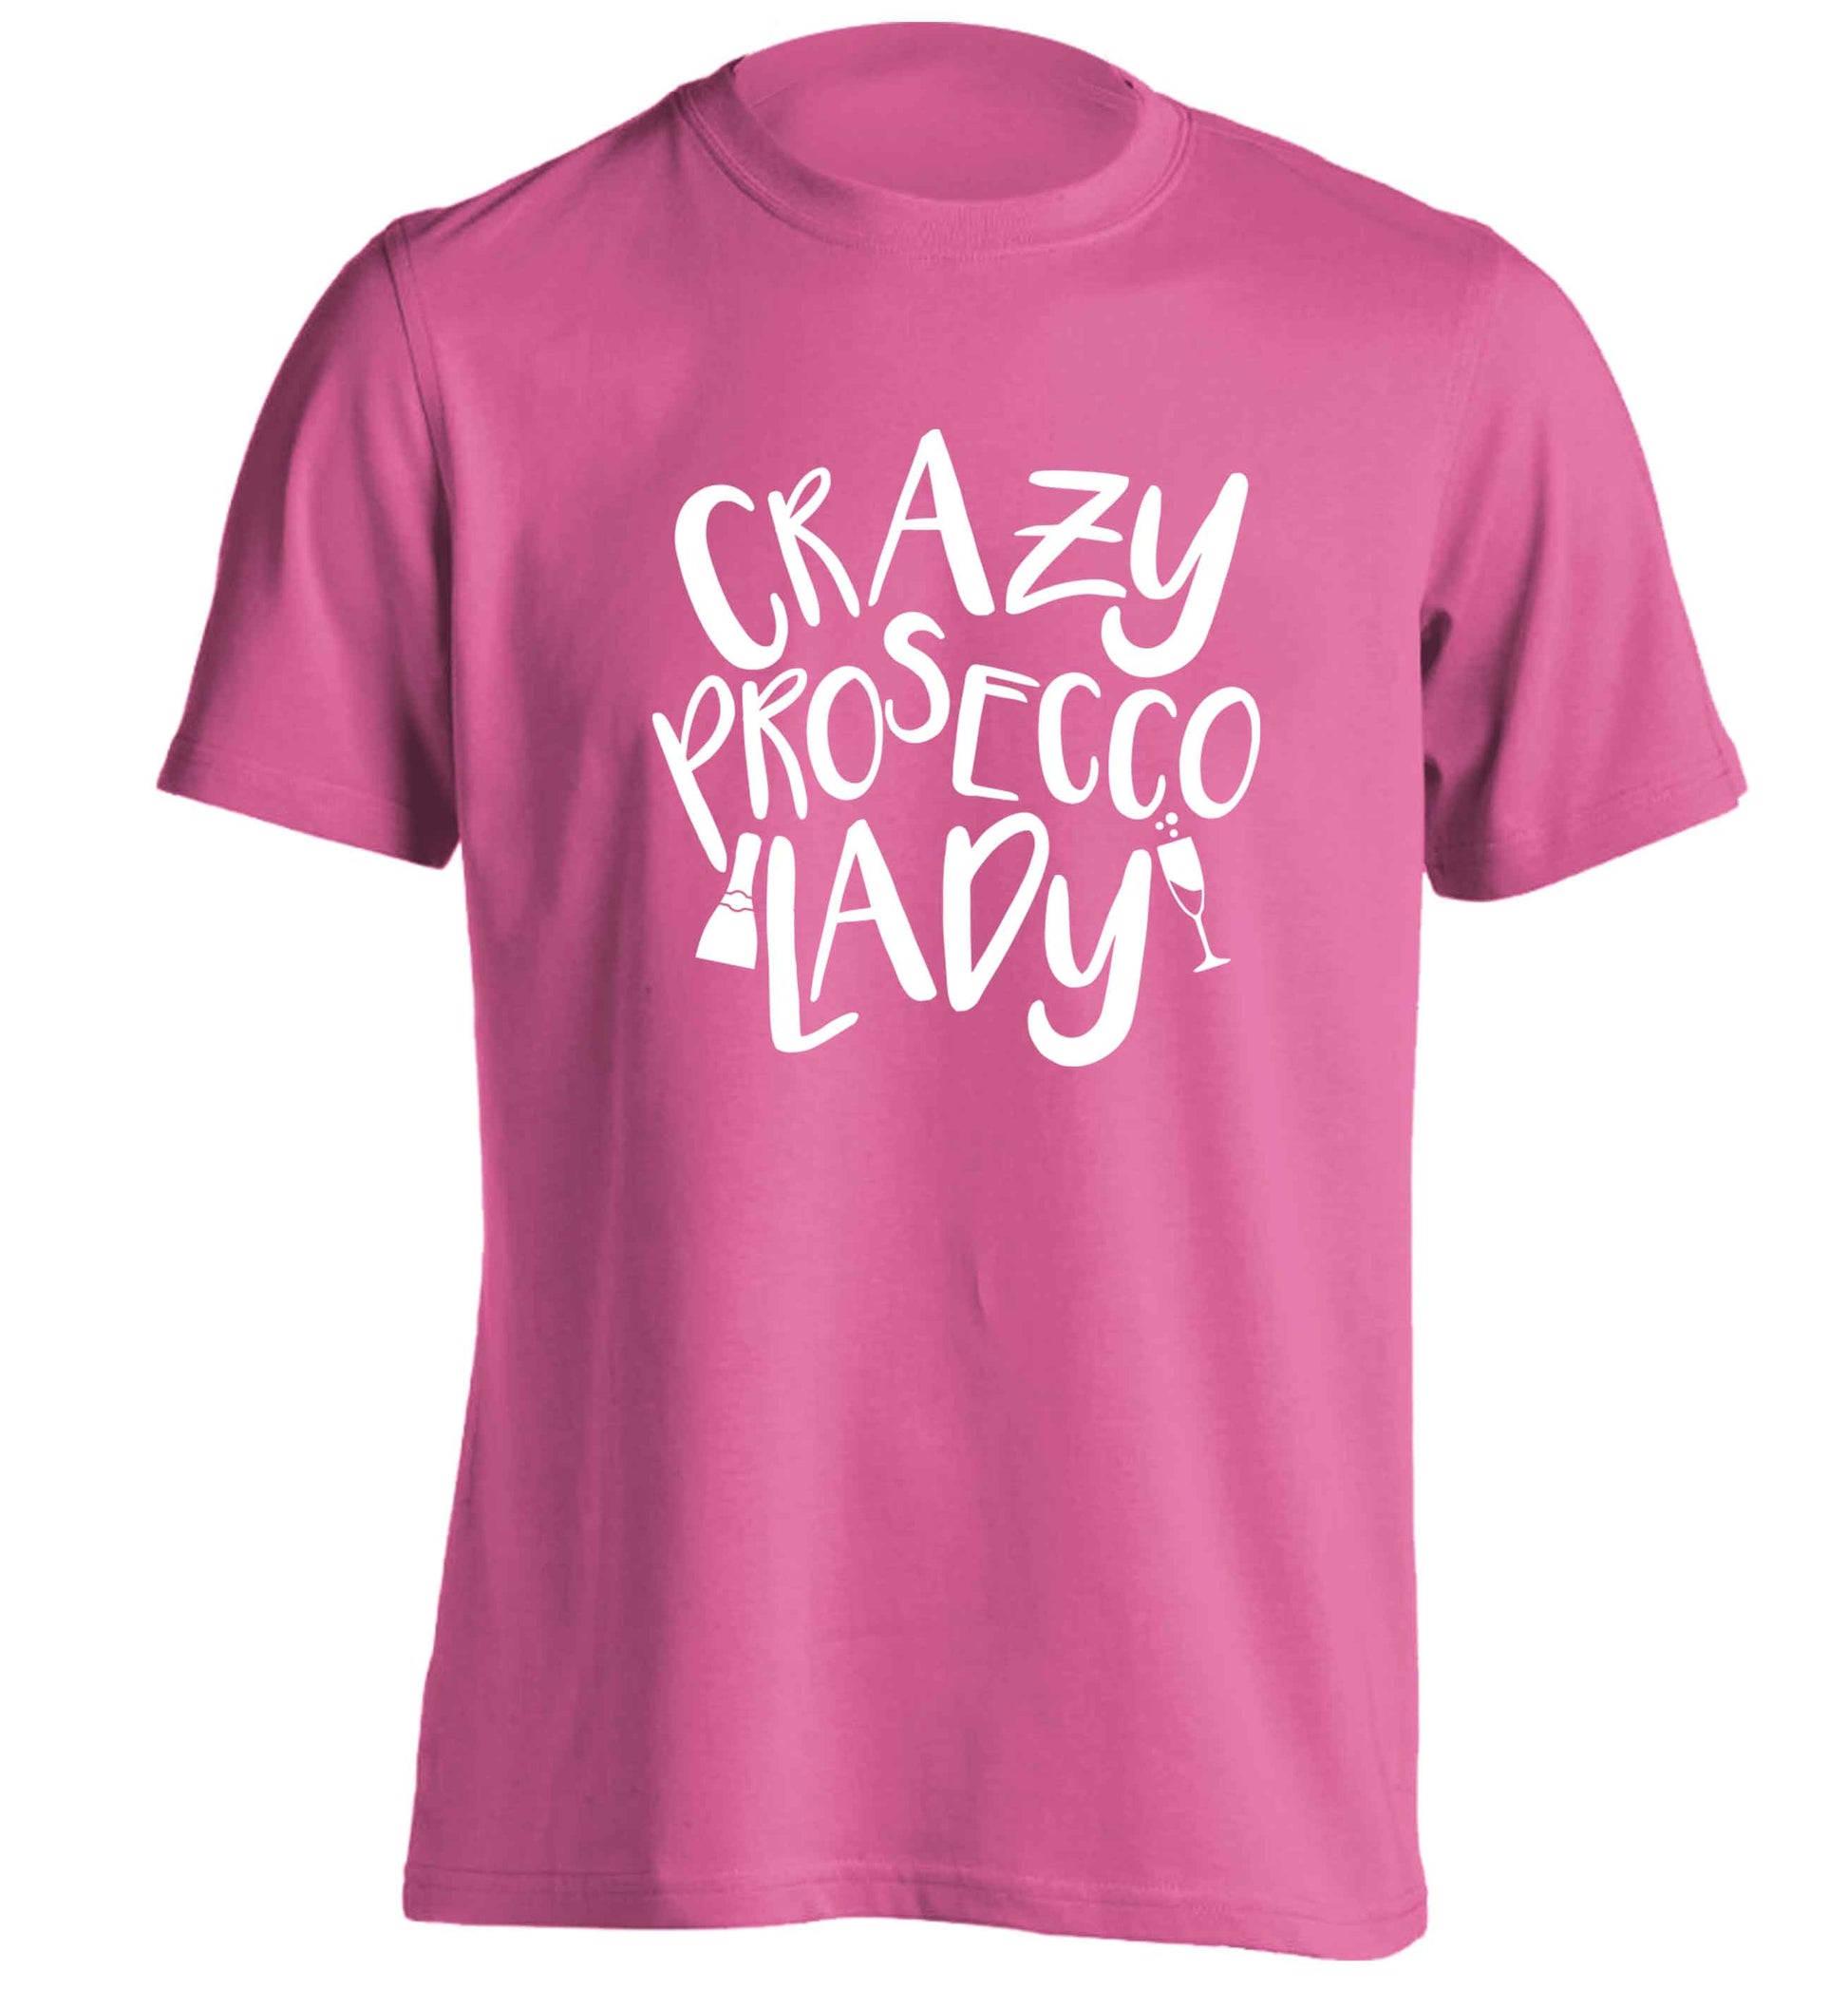 Crazy prosecco lady adults unisex pink Tshirt 2XL